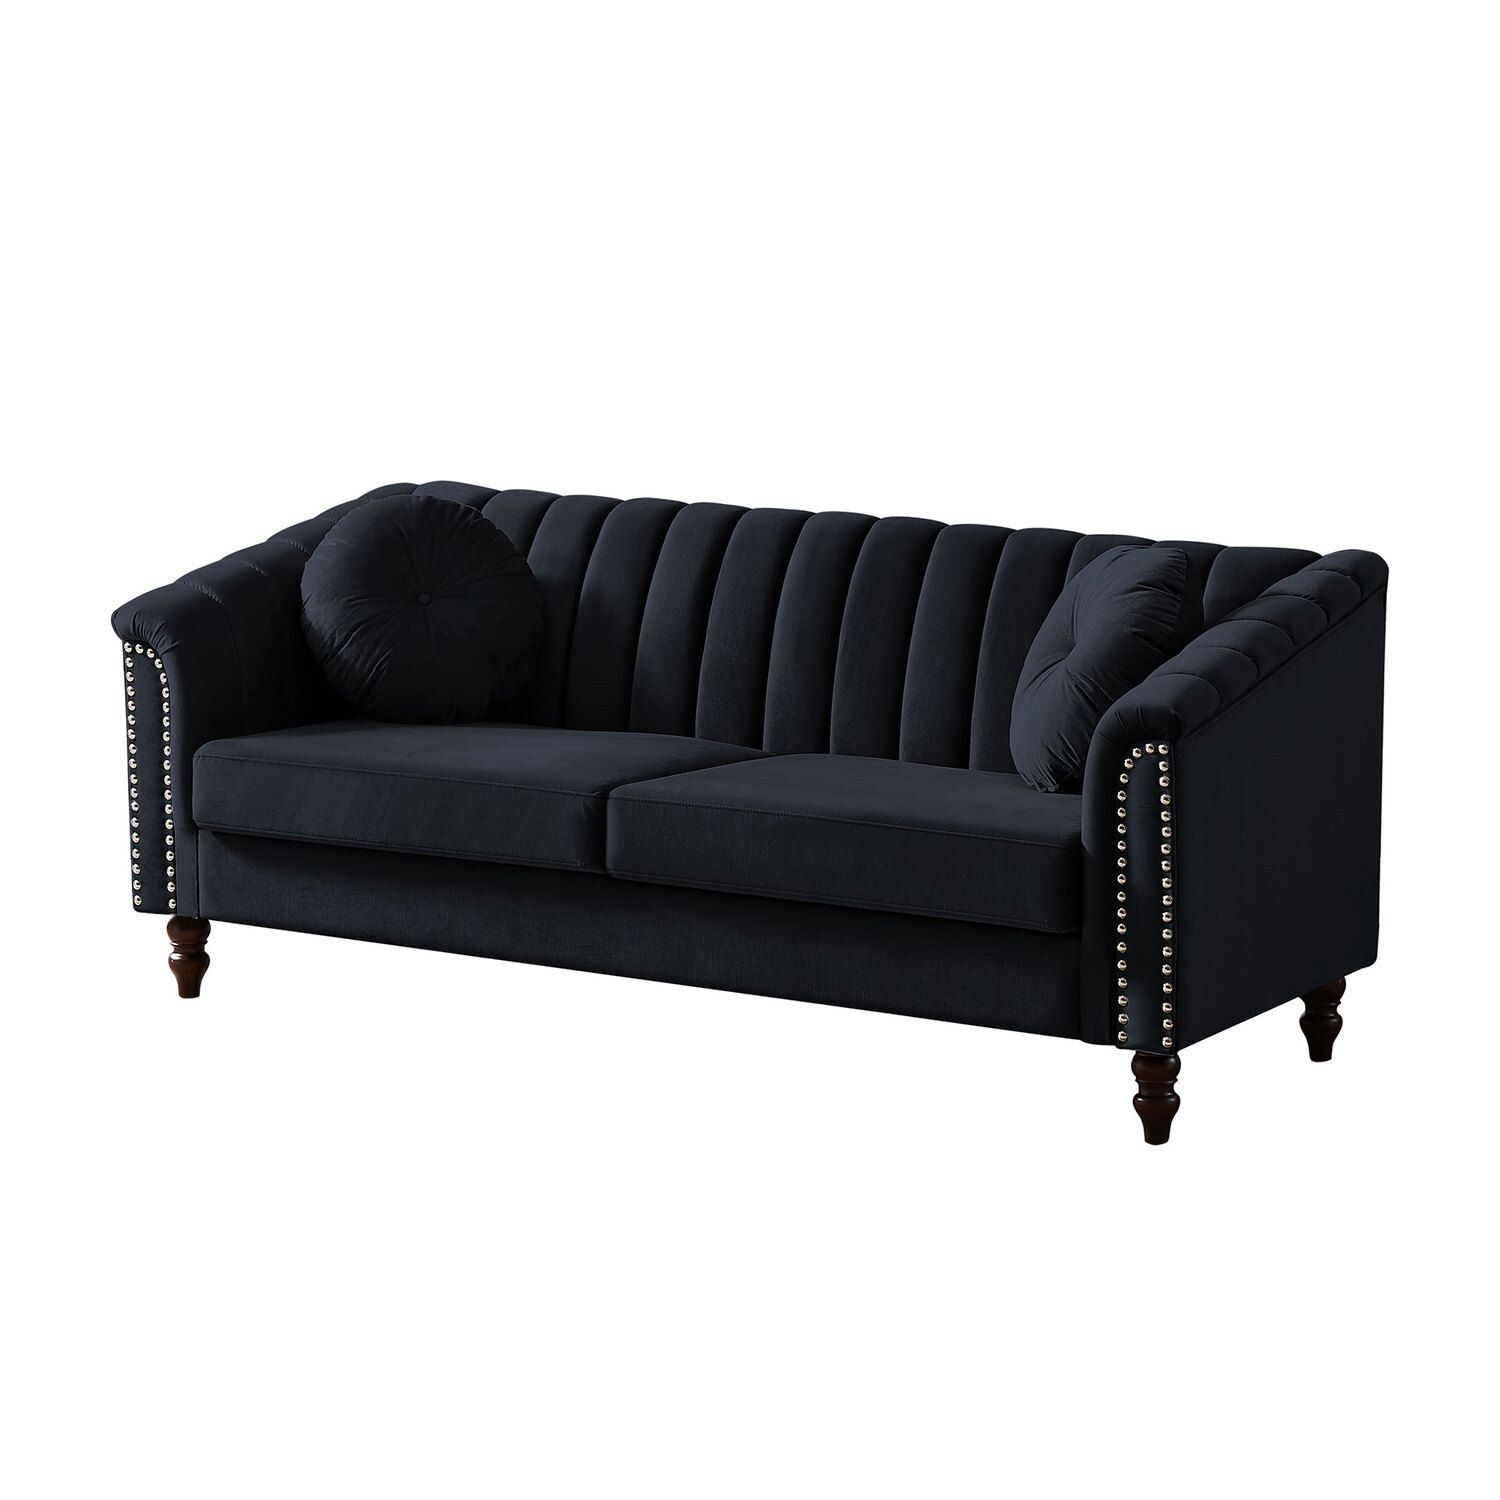 Jasmoder Modern Black Velvet Tufted Sofa 75 In Contemporary/Modern Medium  Size In The Couches, Sofas & Loveseats Department At Lowes Within Black Velvet 2 Seater Sofa Beds (View 14 of 15)